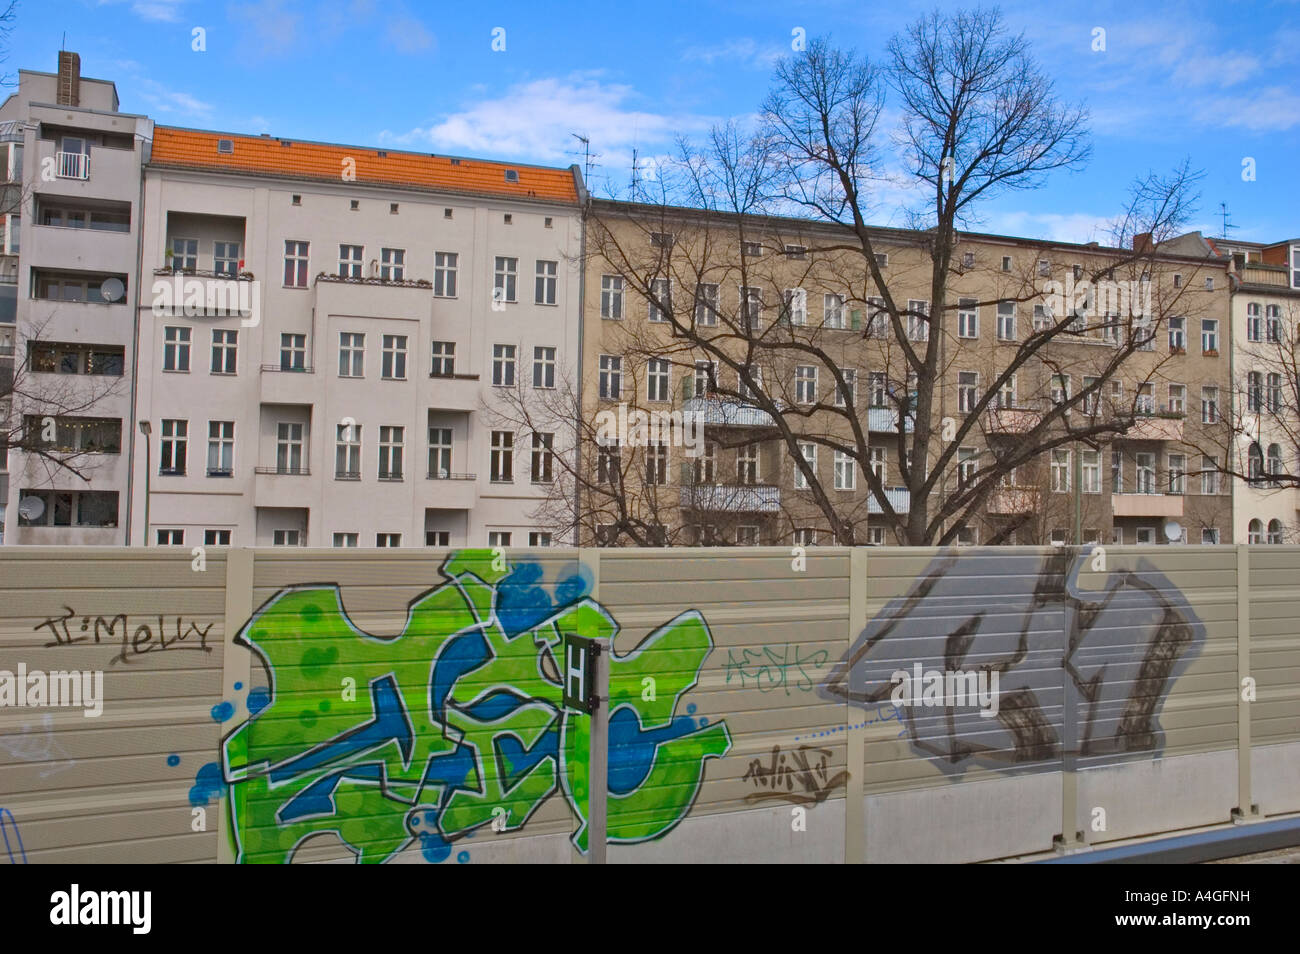 view out of S bahn train central Berlin Germany EU Stock Photo